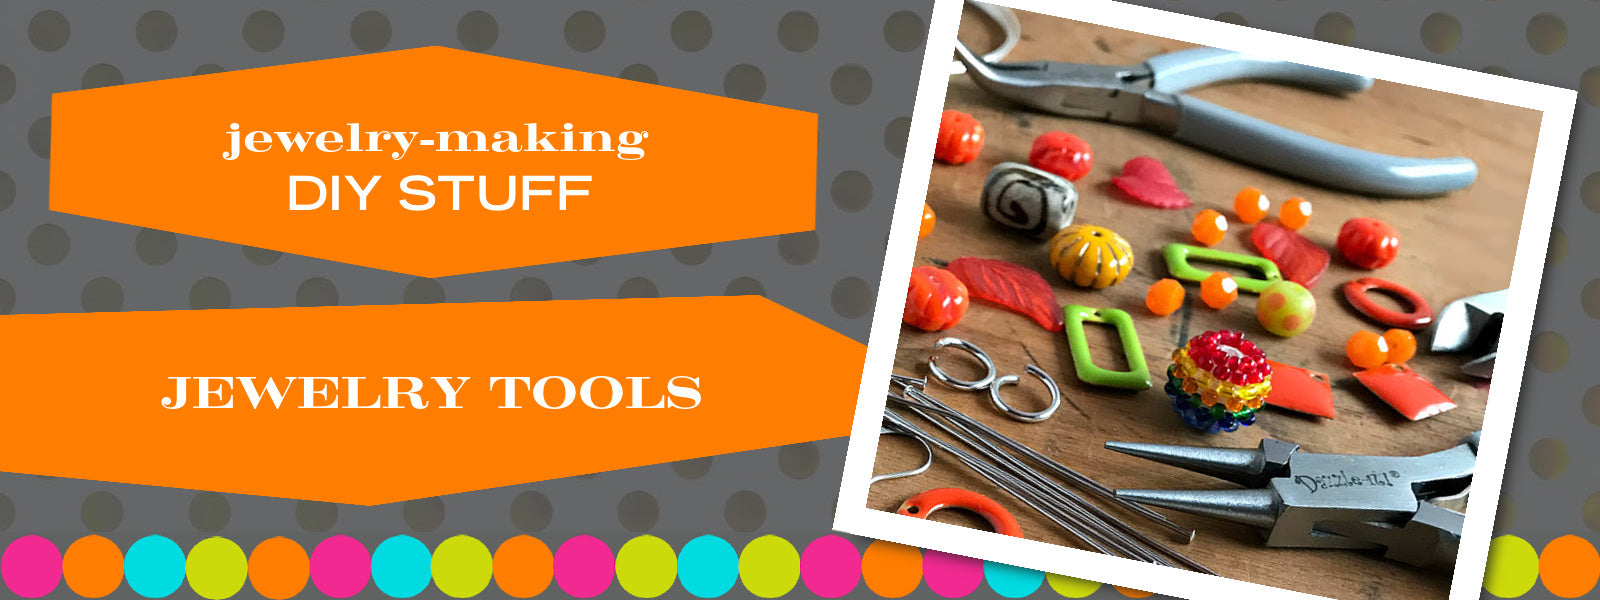 When it comes to making jewelry, if you want professional looking results, using Suzie Q Studio's jewelry-making tools will make the process infinitely easier!